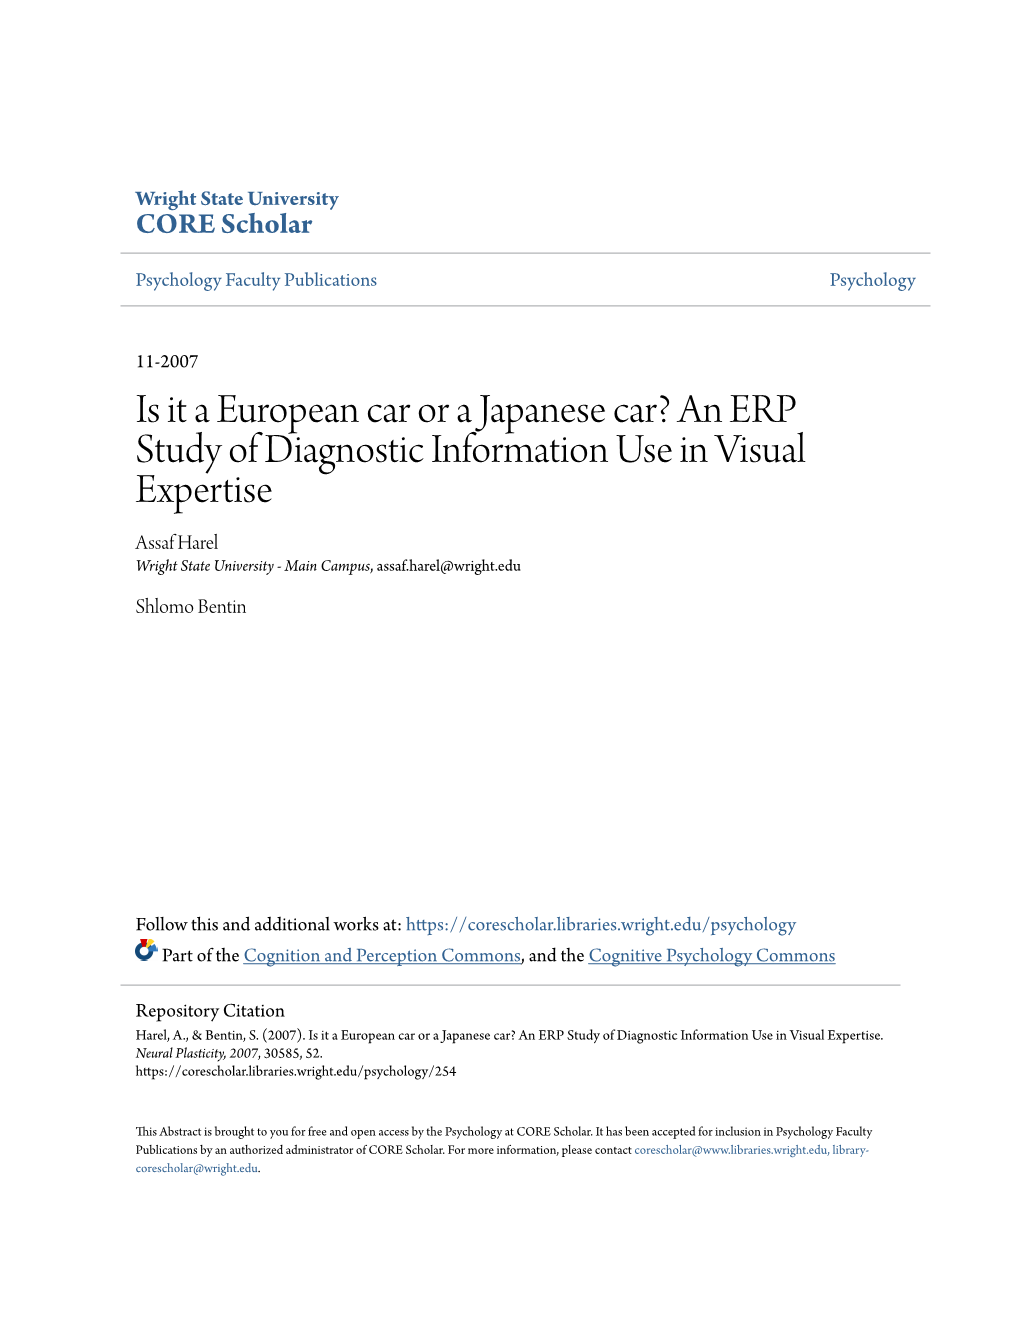 An ERP Study of Diagnostic Information Use in Visual Expertise Assaf Harel Wright State University - Main Campus, Assaf.Harel@Wright.Edu